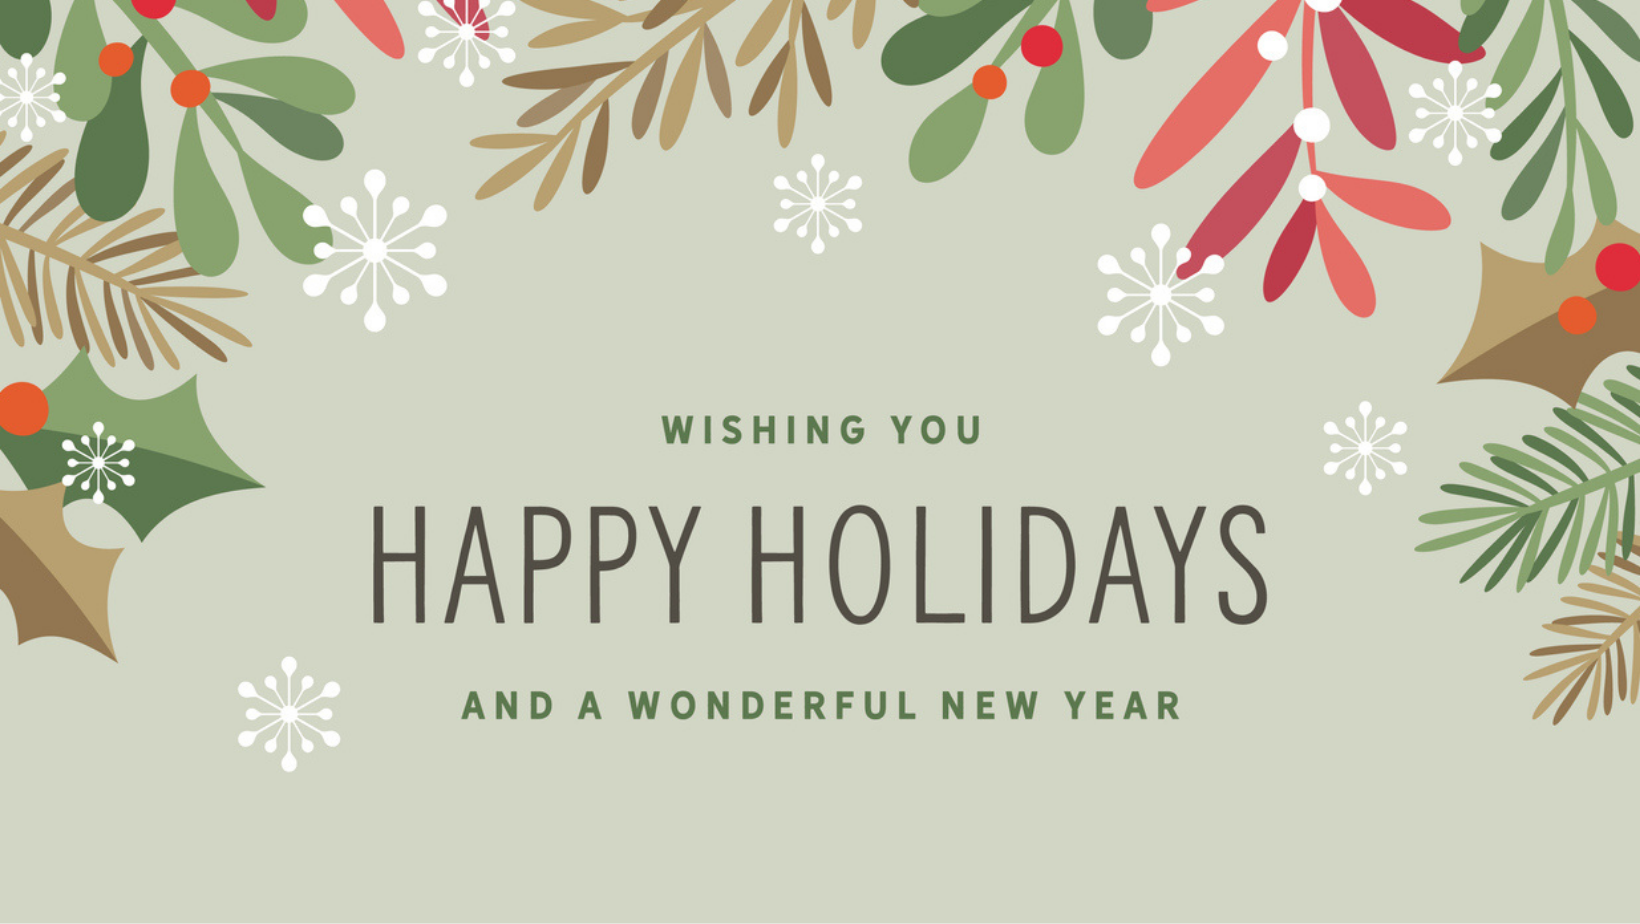 Thank you and happy holidays! - PRINZ - Public Relations Institute of ...